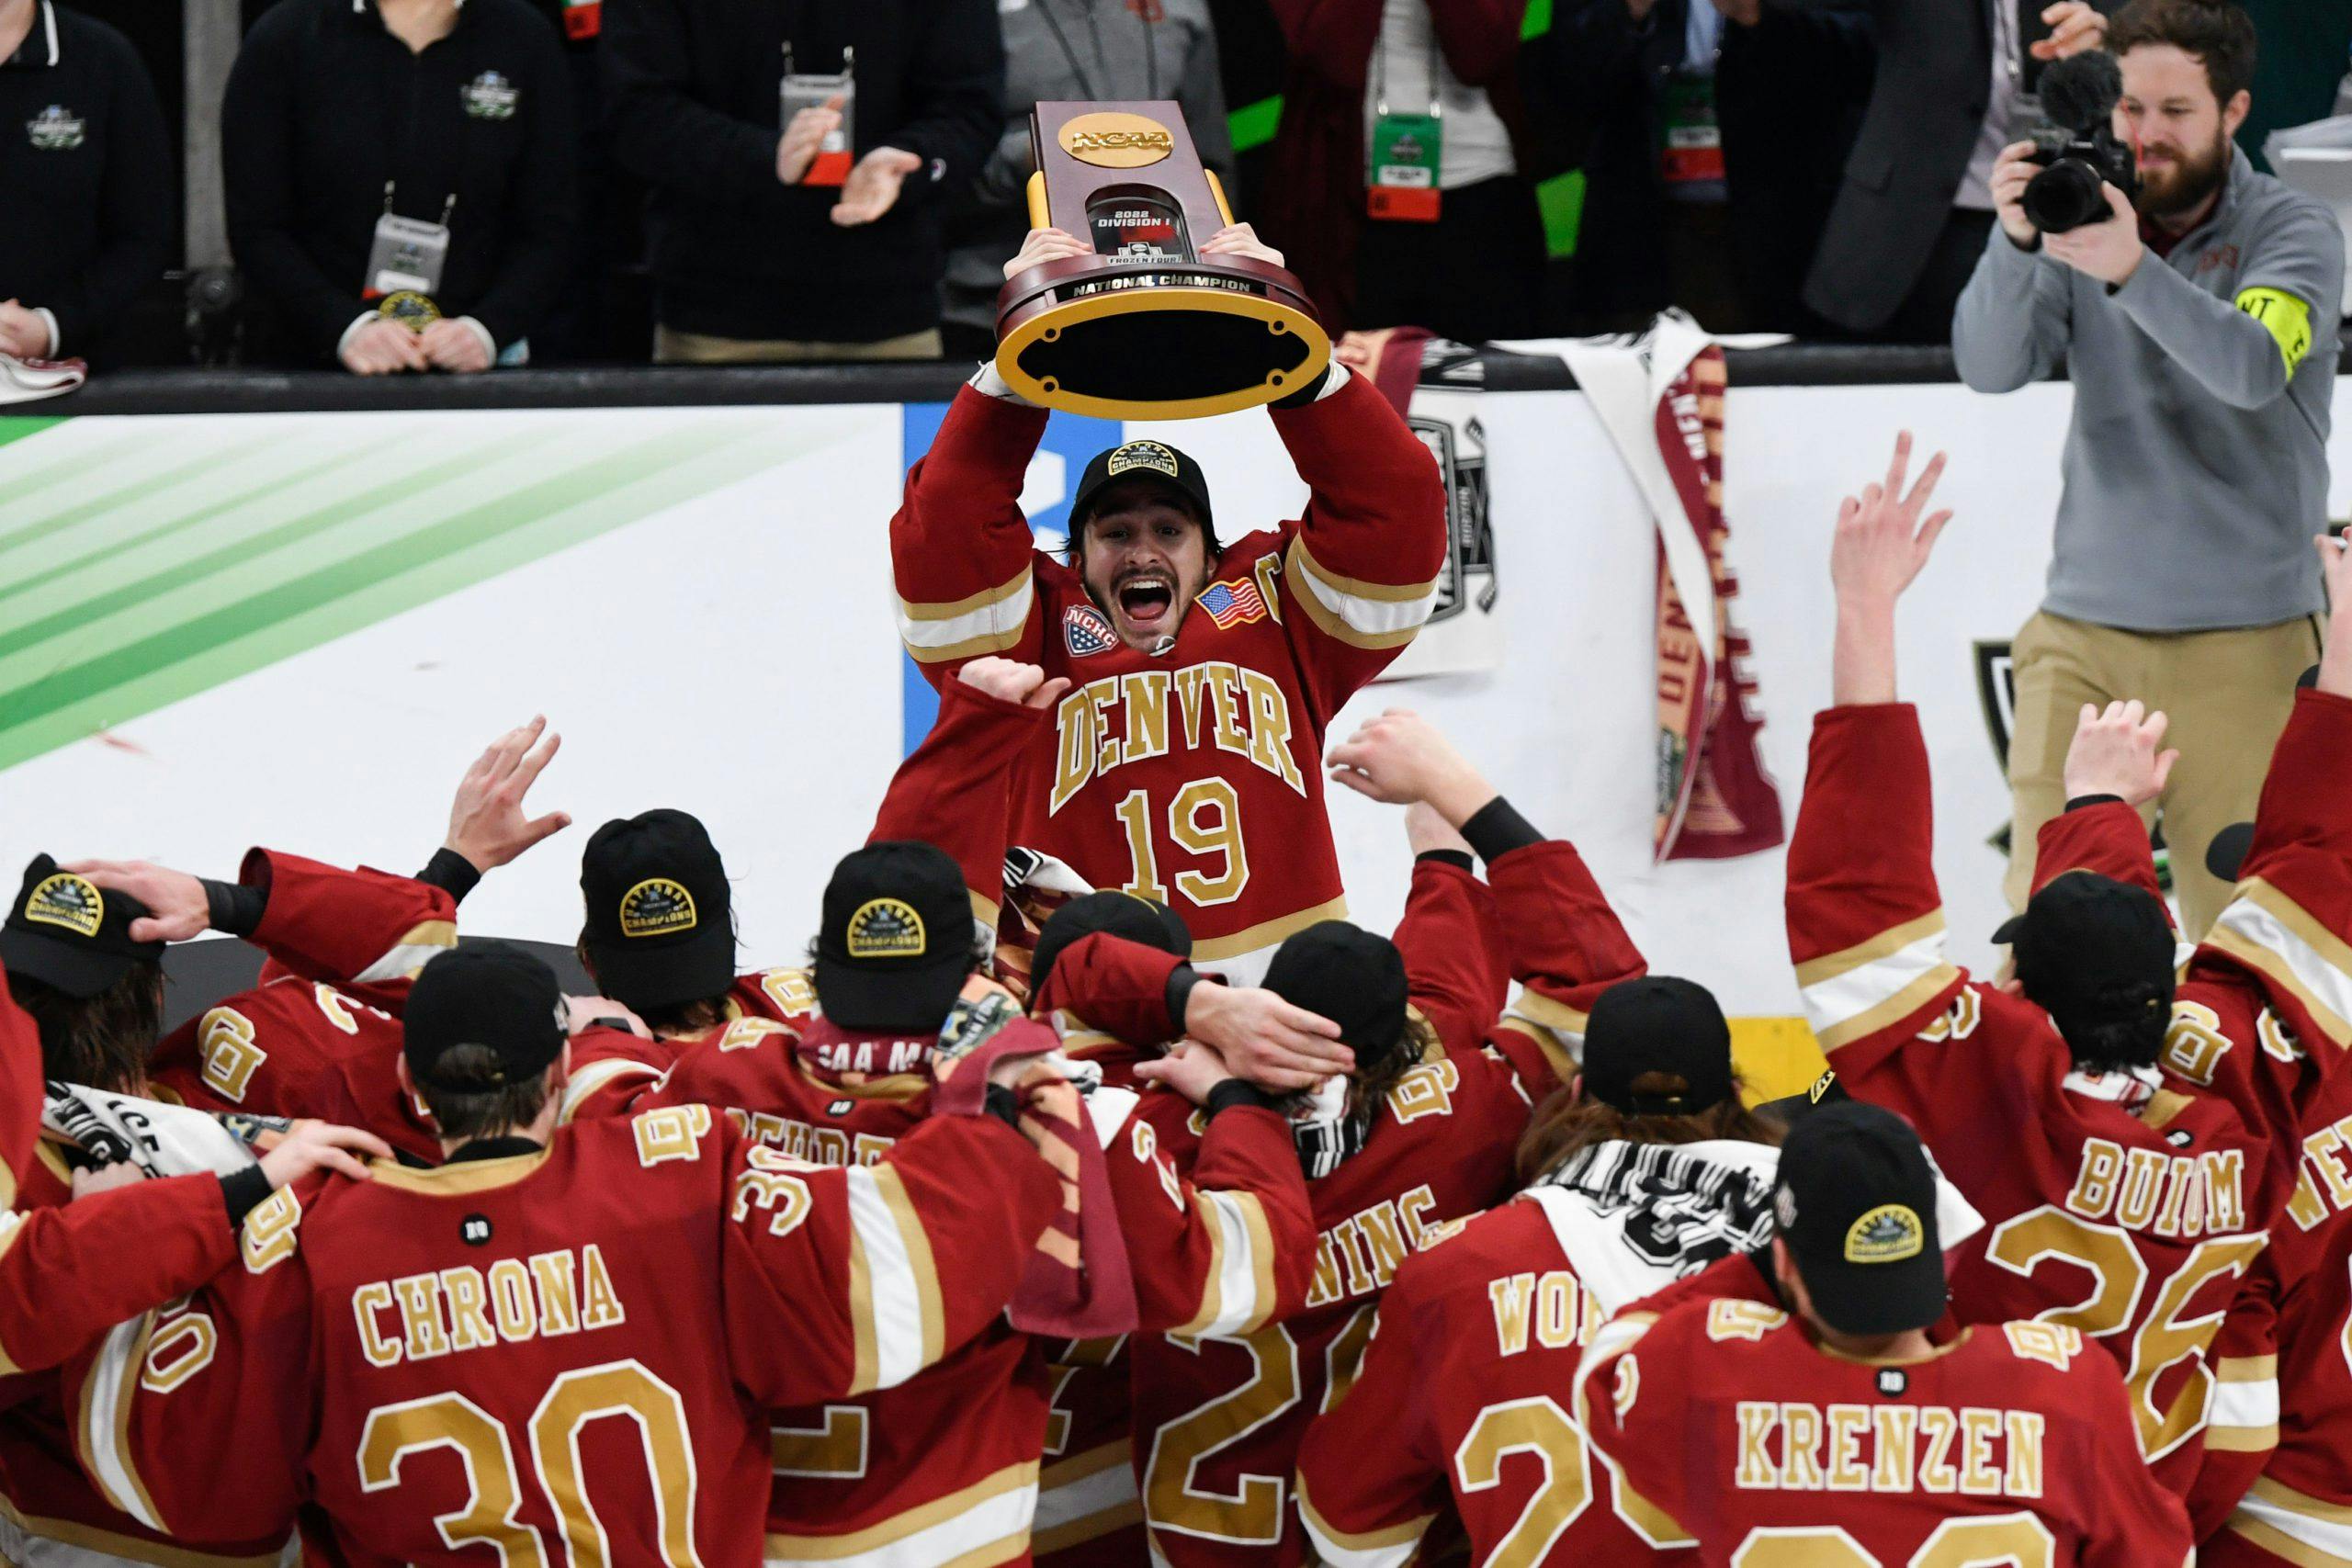 Denver Pioneers crowned Frozen Four champions in 5-1 win